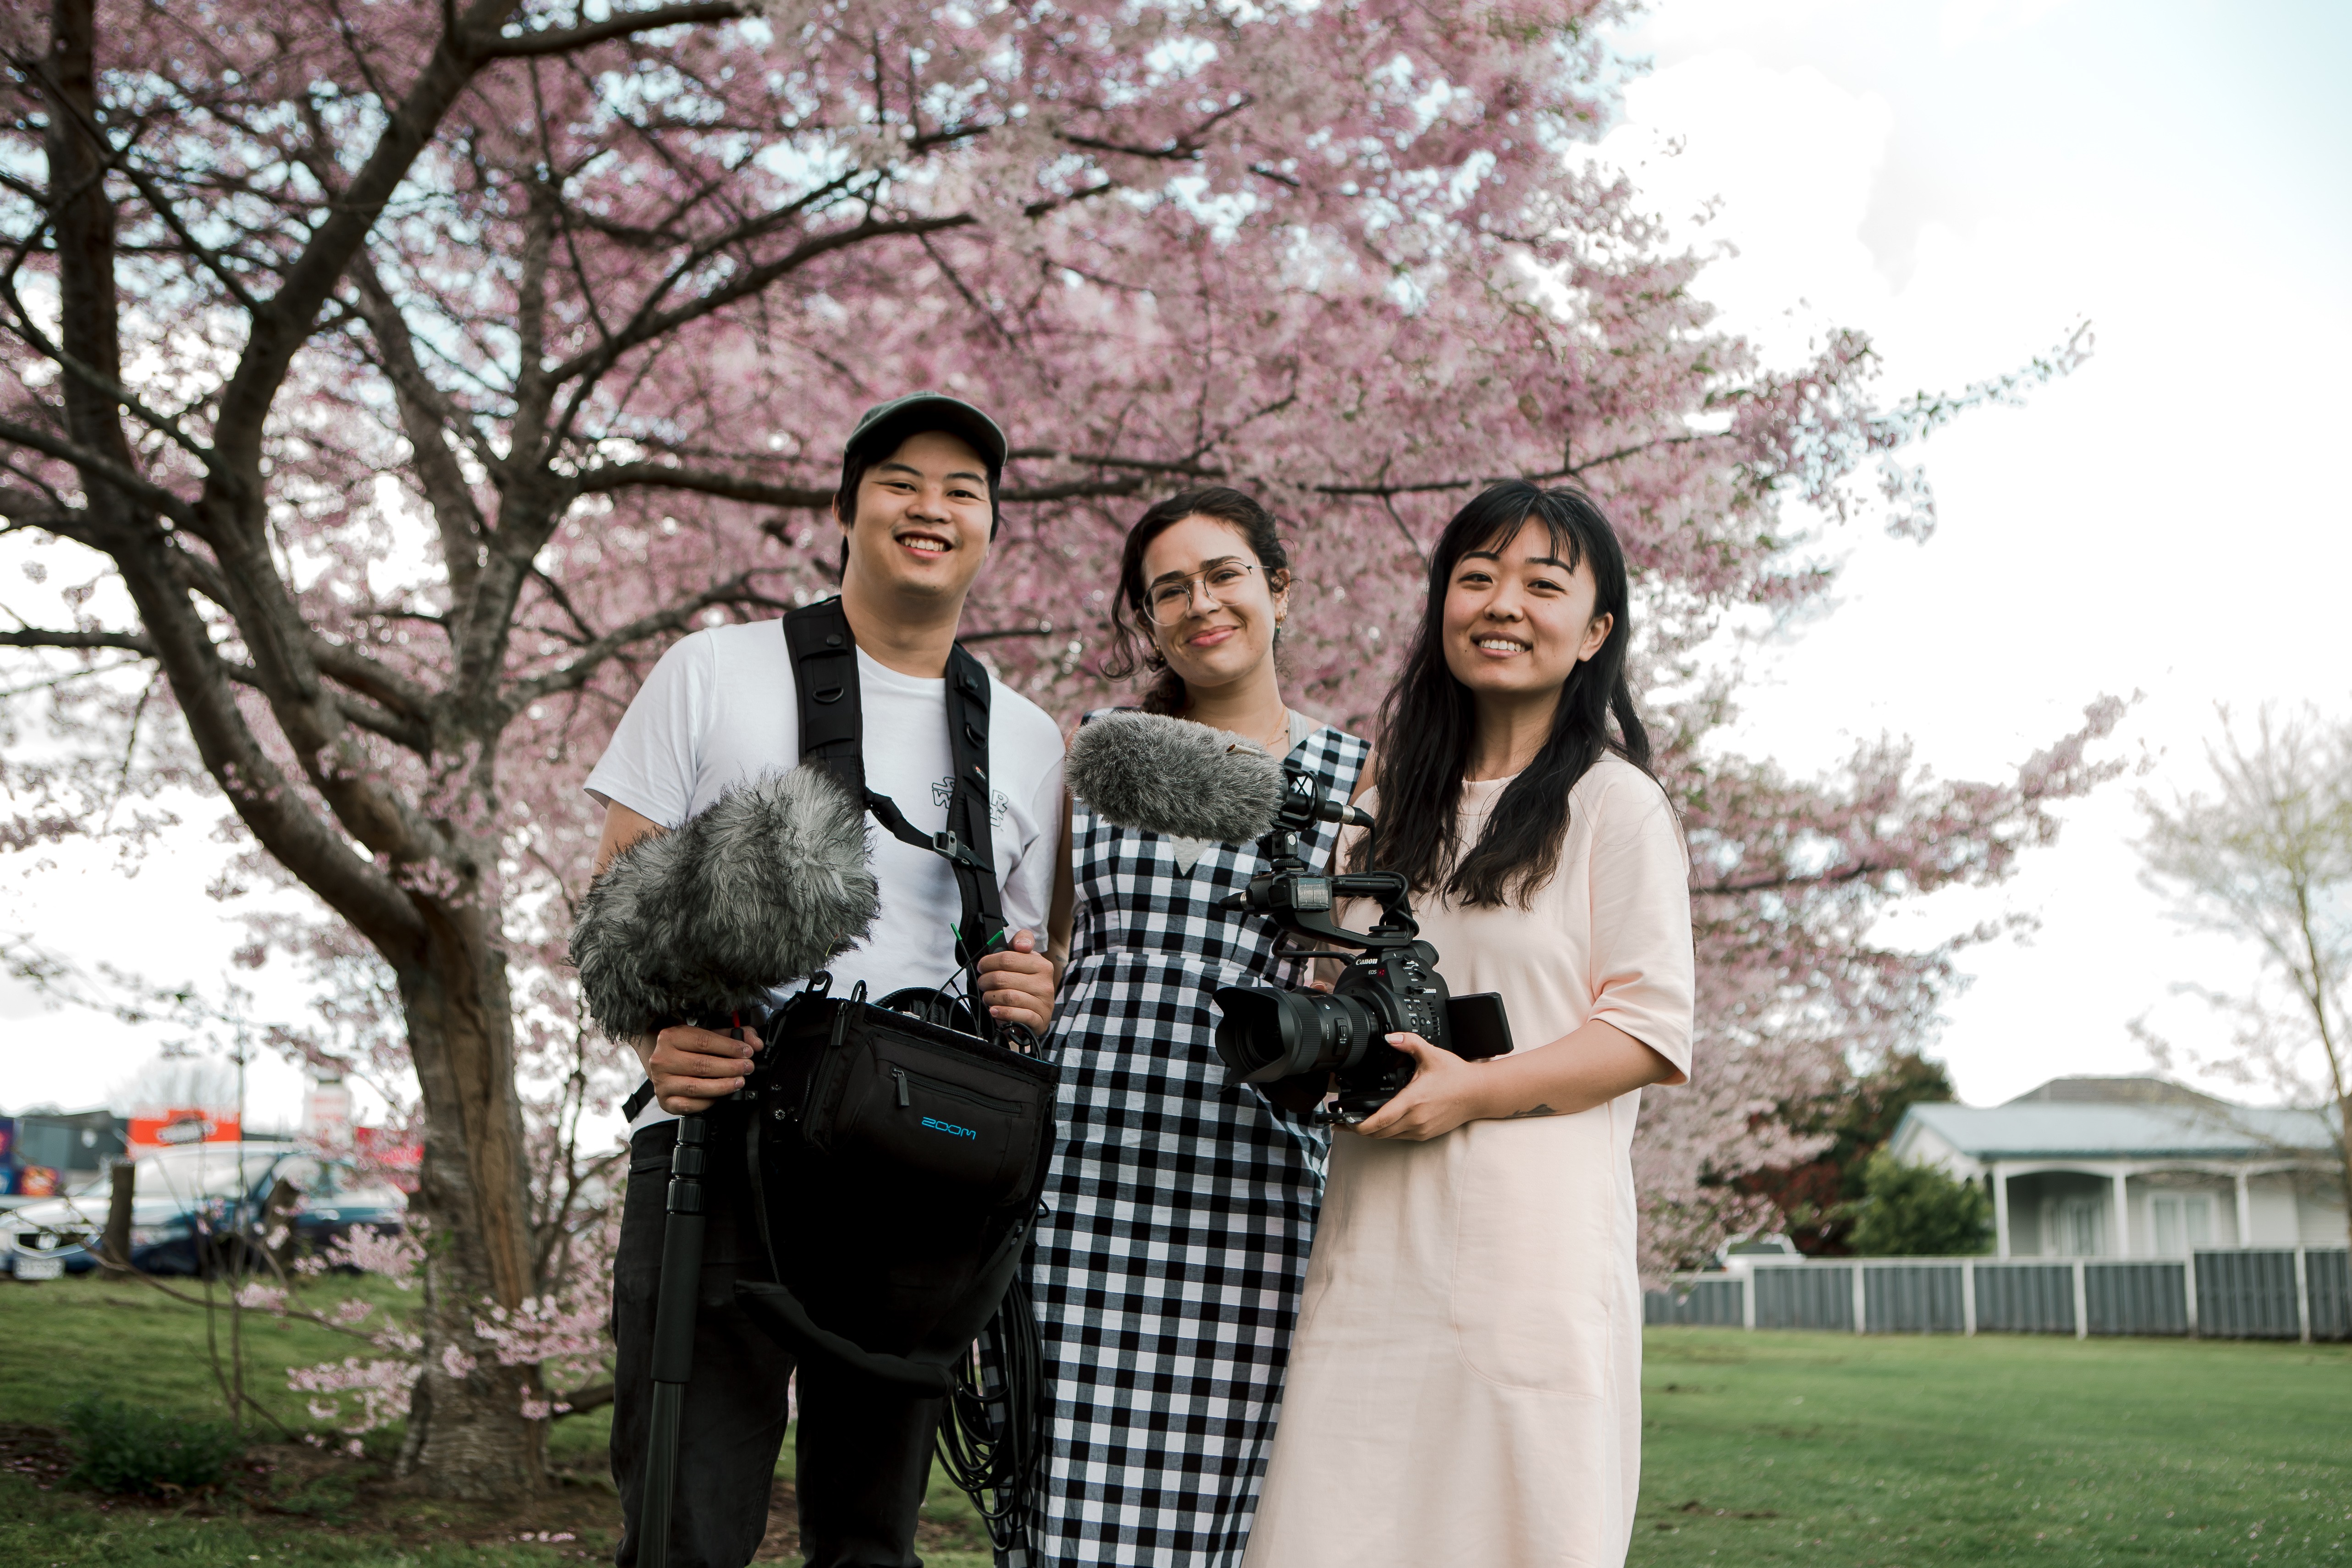 A man holding a boom,  a woman, and another woman holding a camera pose together in front of a blossoming tree.